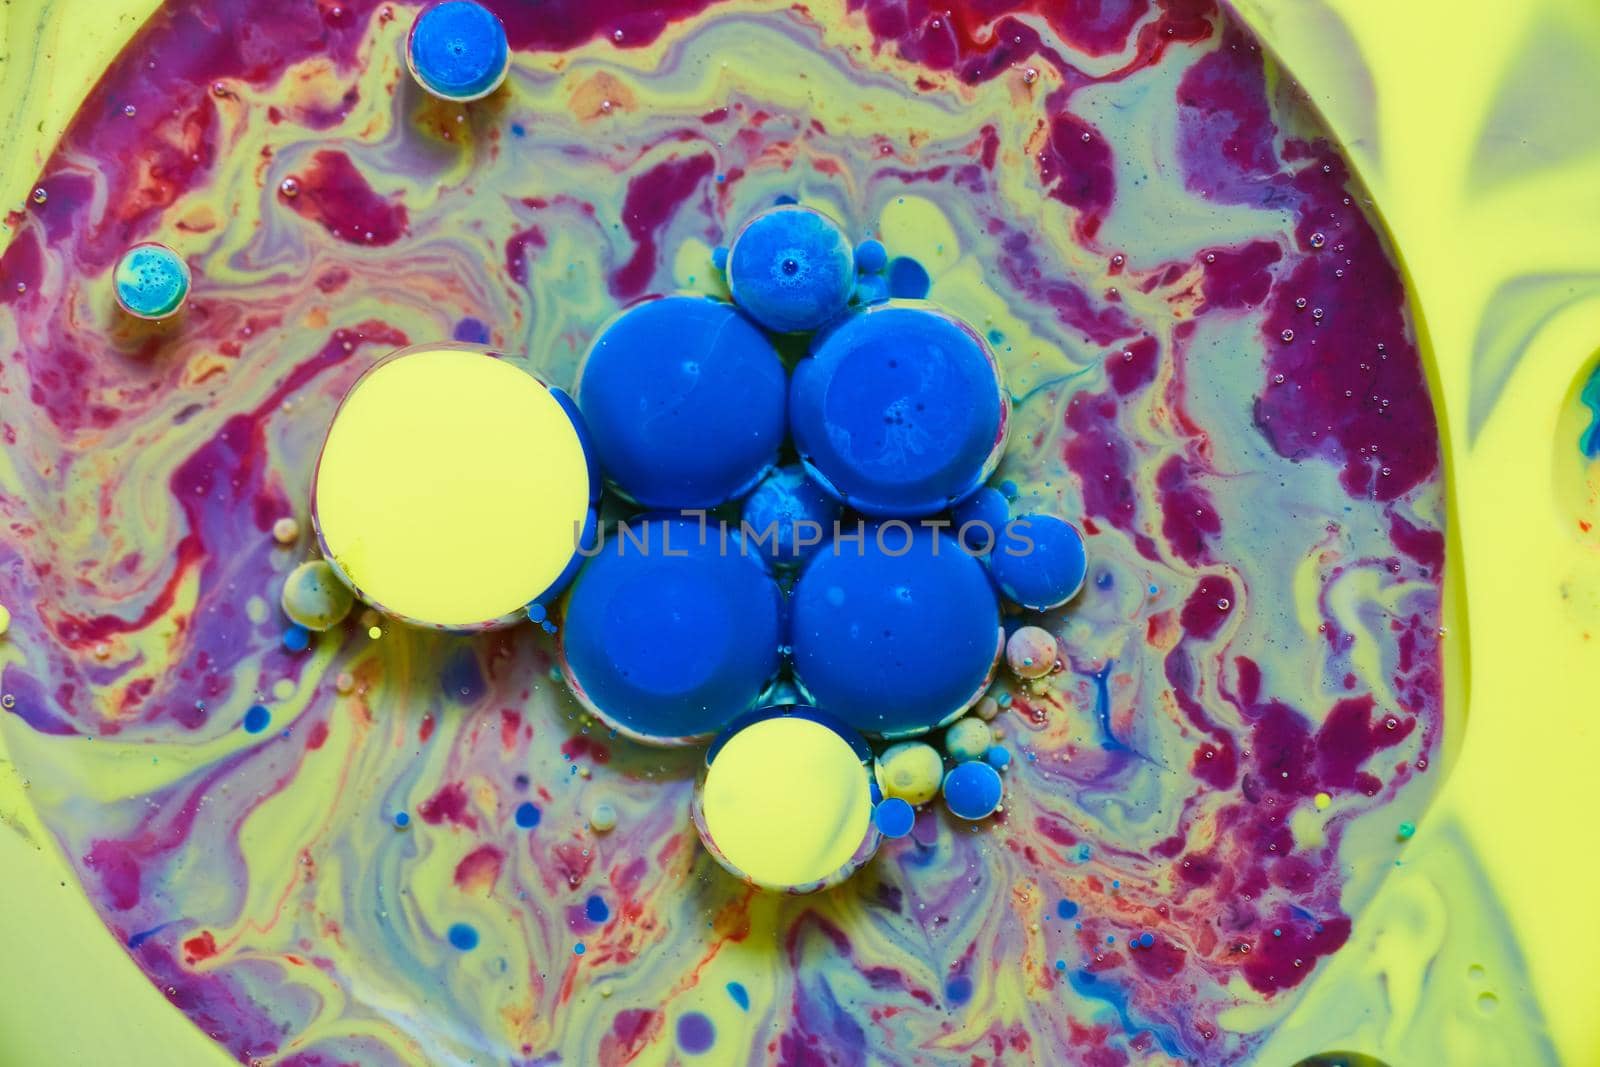 Image of Blue and yellow spheres floating on rainbow surface of silky liquid